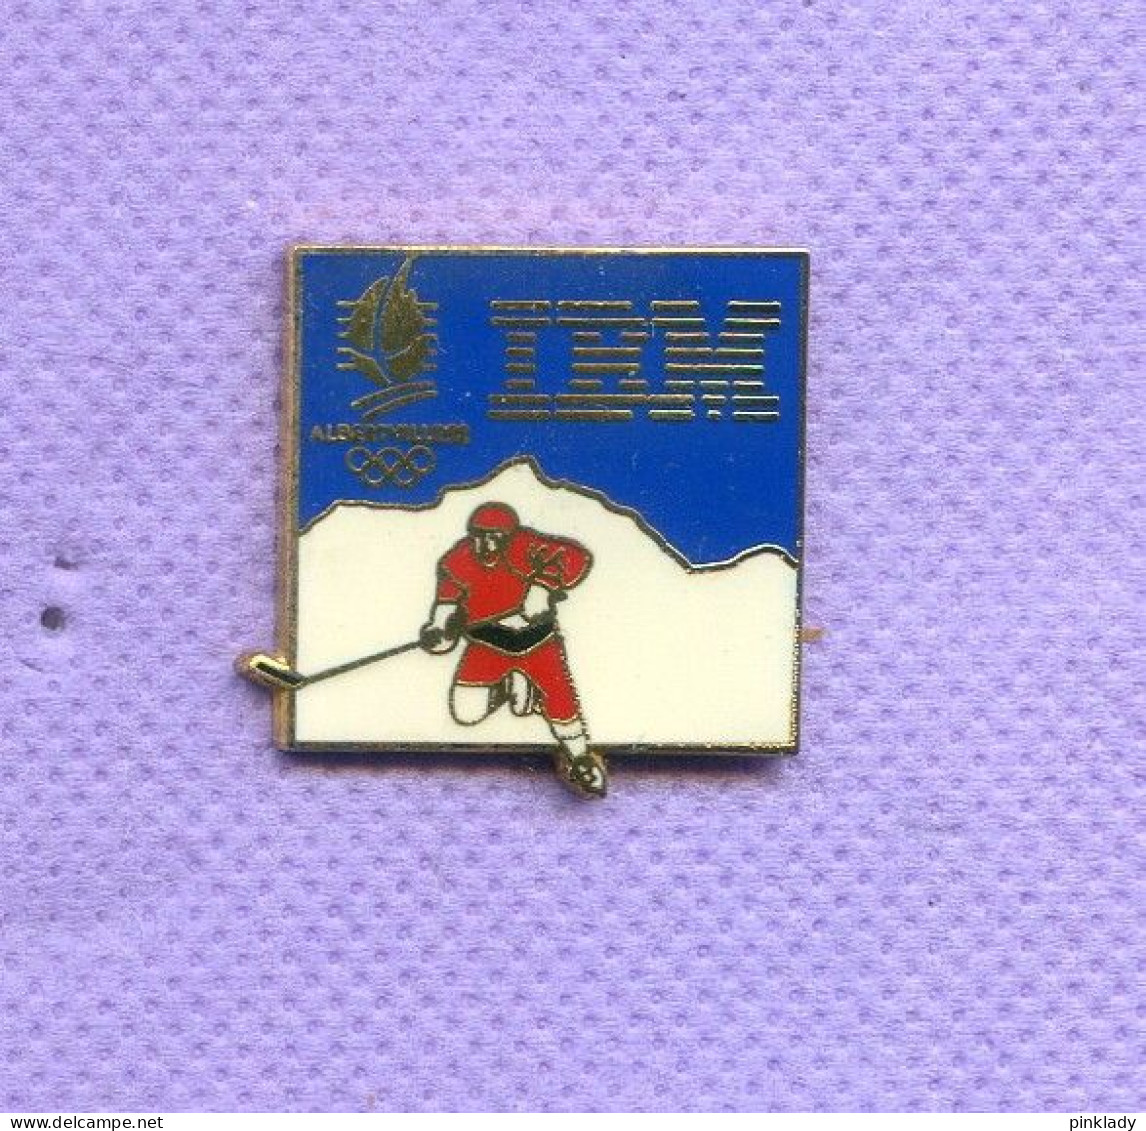 Rare Pins Jeux Olympiques Albertville 1992 Hockey Ibm Ab126 - Jeux Olympiques